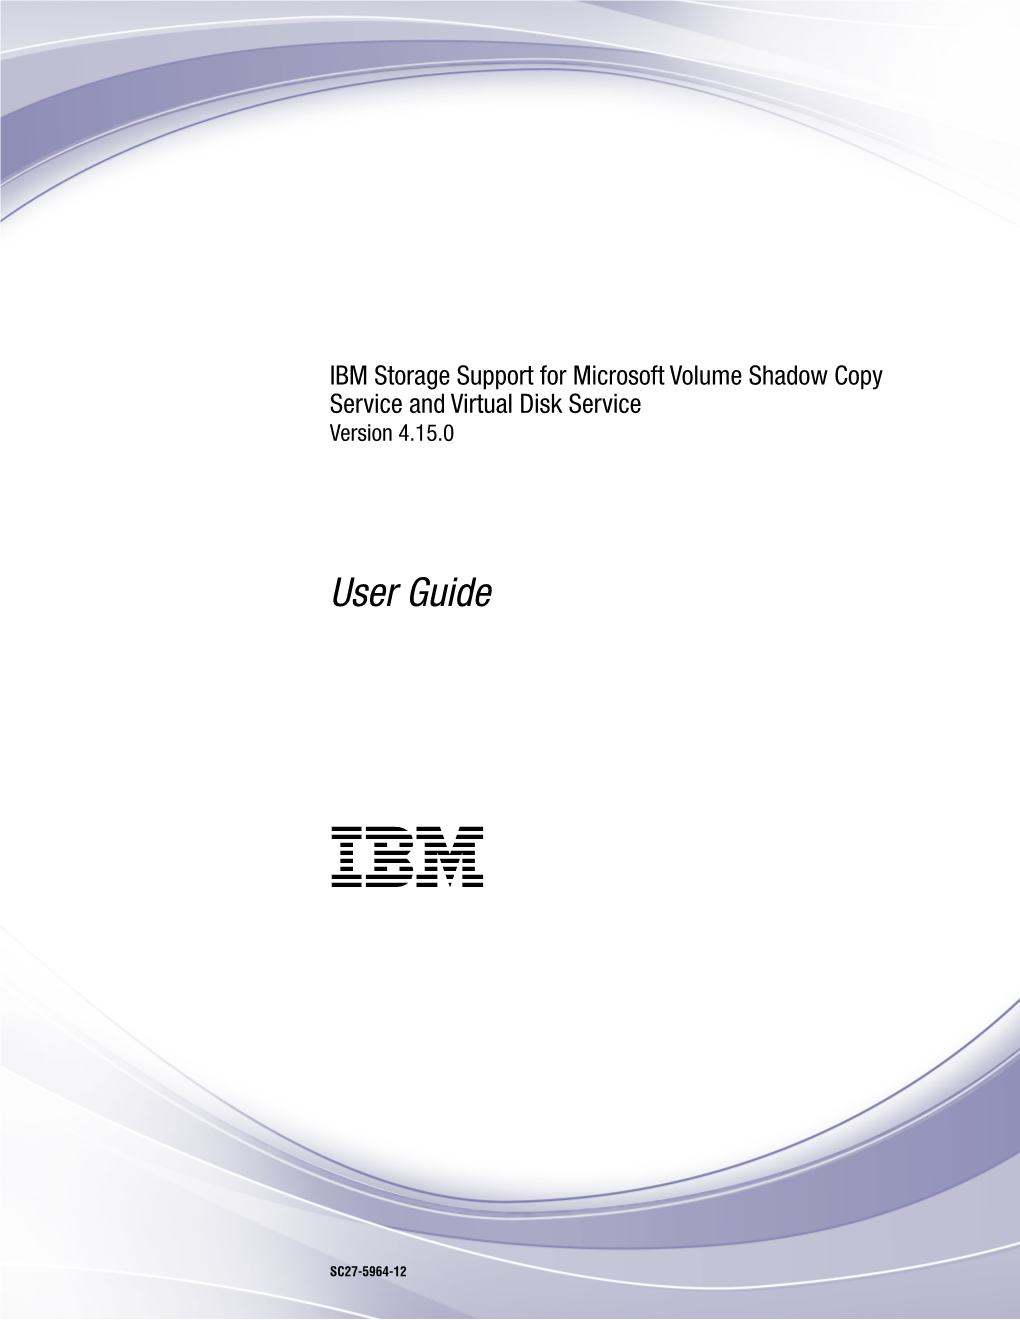 IBM Storage Support for Microsoft Volume Shadow Copy Service and Virtual Disk Service Version 4.15.0